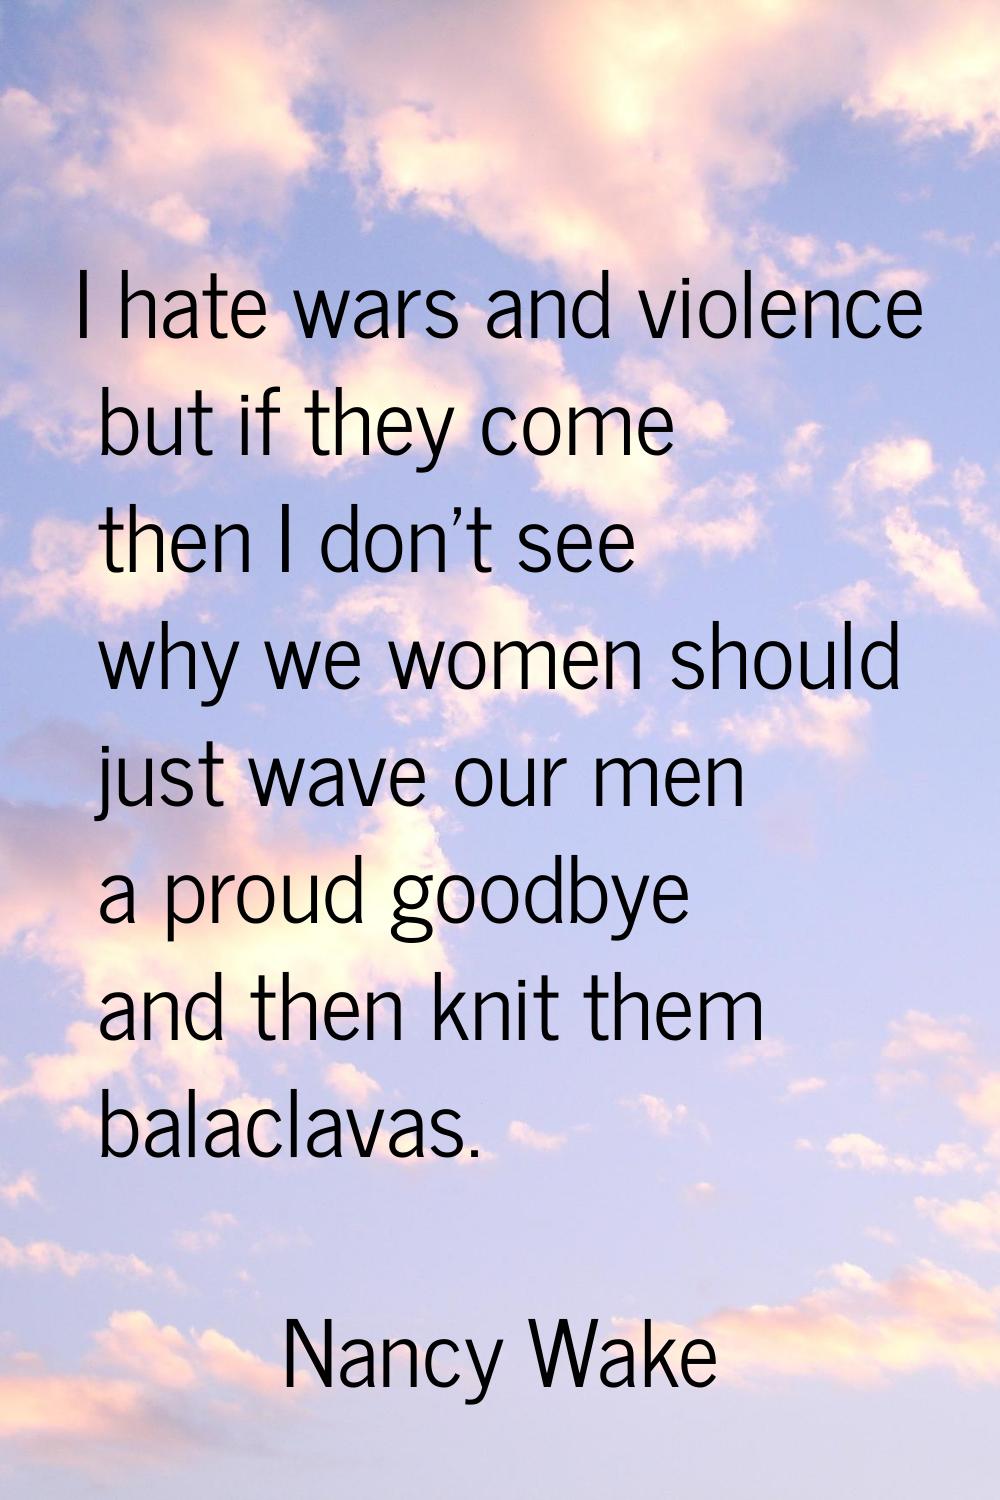 I hate wars and violence but if they come then I don't see why we women should just wave our men a 